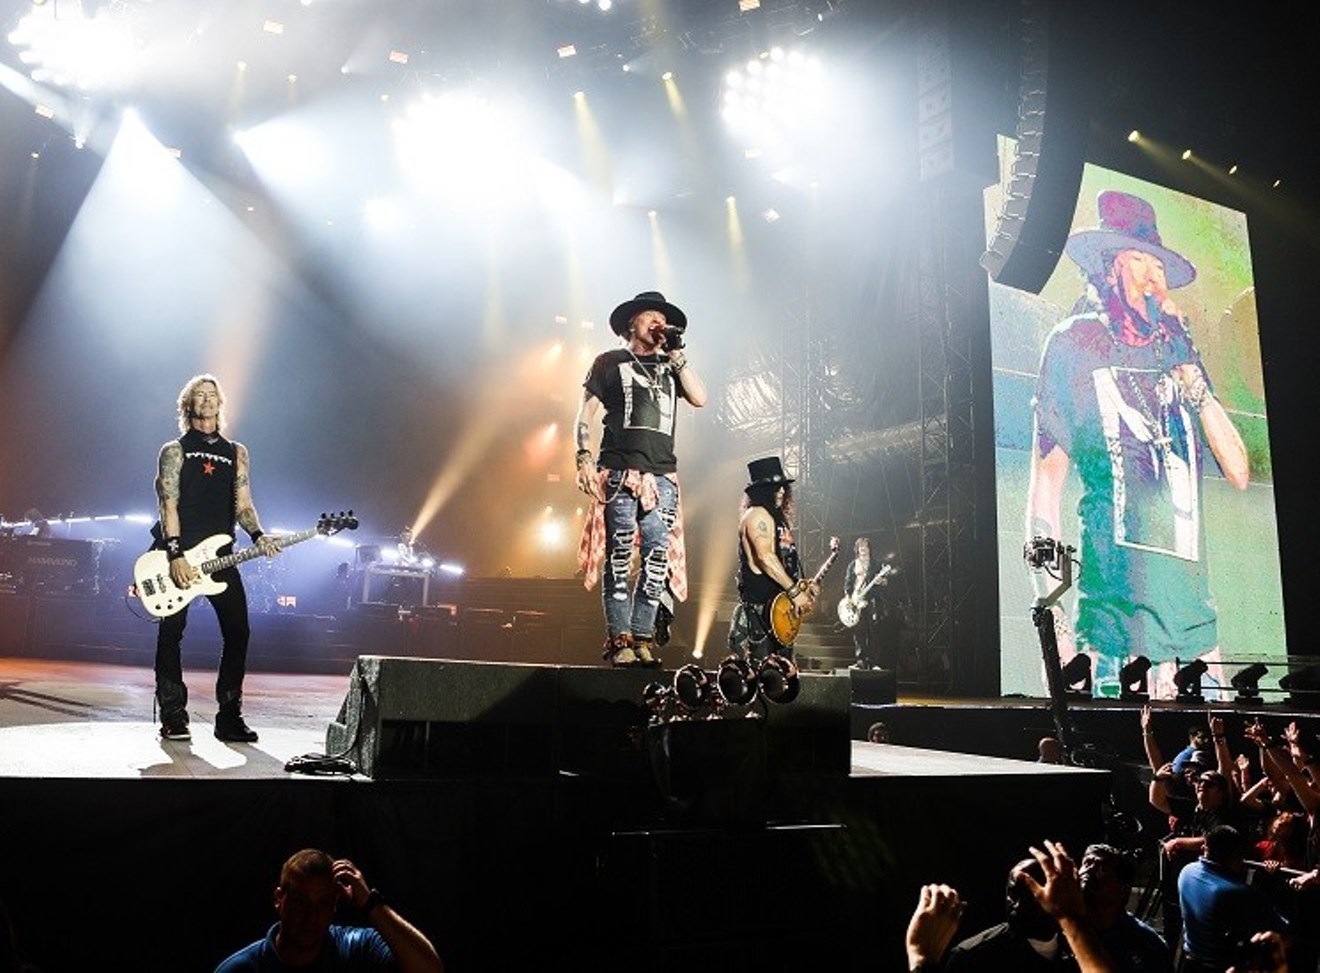 Guns N' Roses kept the good times rolling in 2017, to many people's surprise, with the ongoing Not in This Lifetime Tour. The tour stopped through Toyota Center in November.